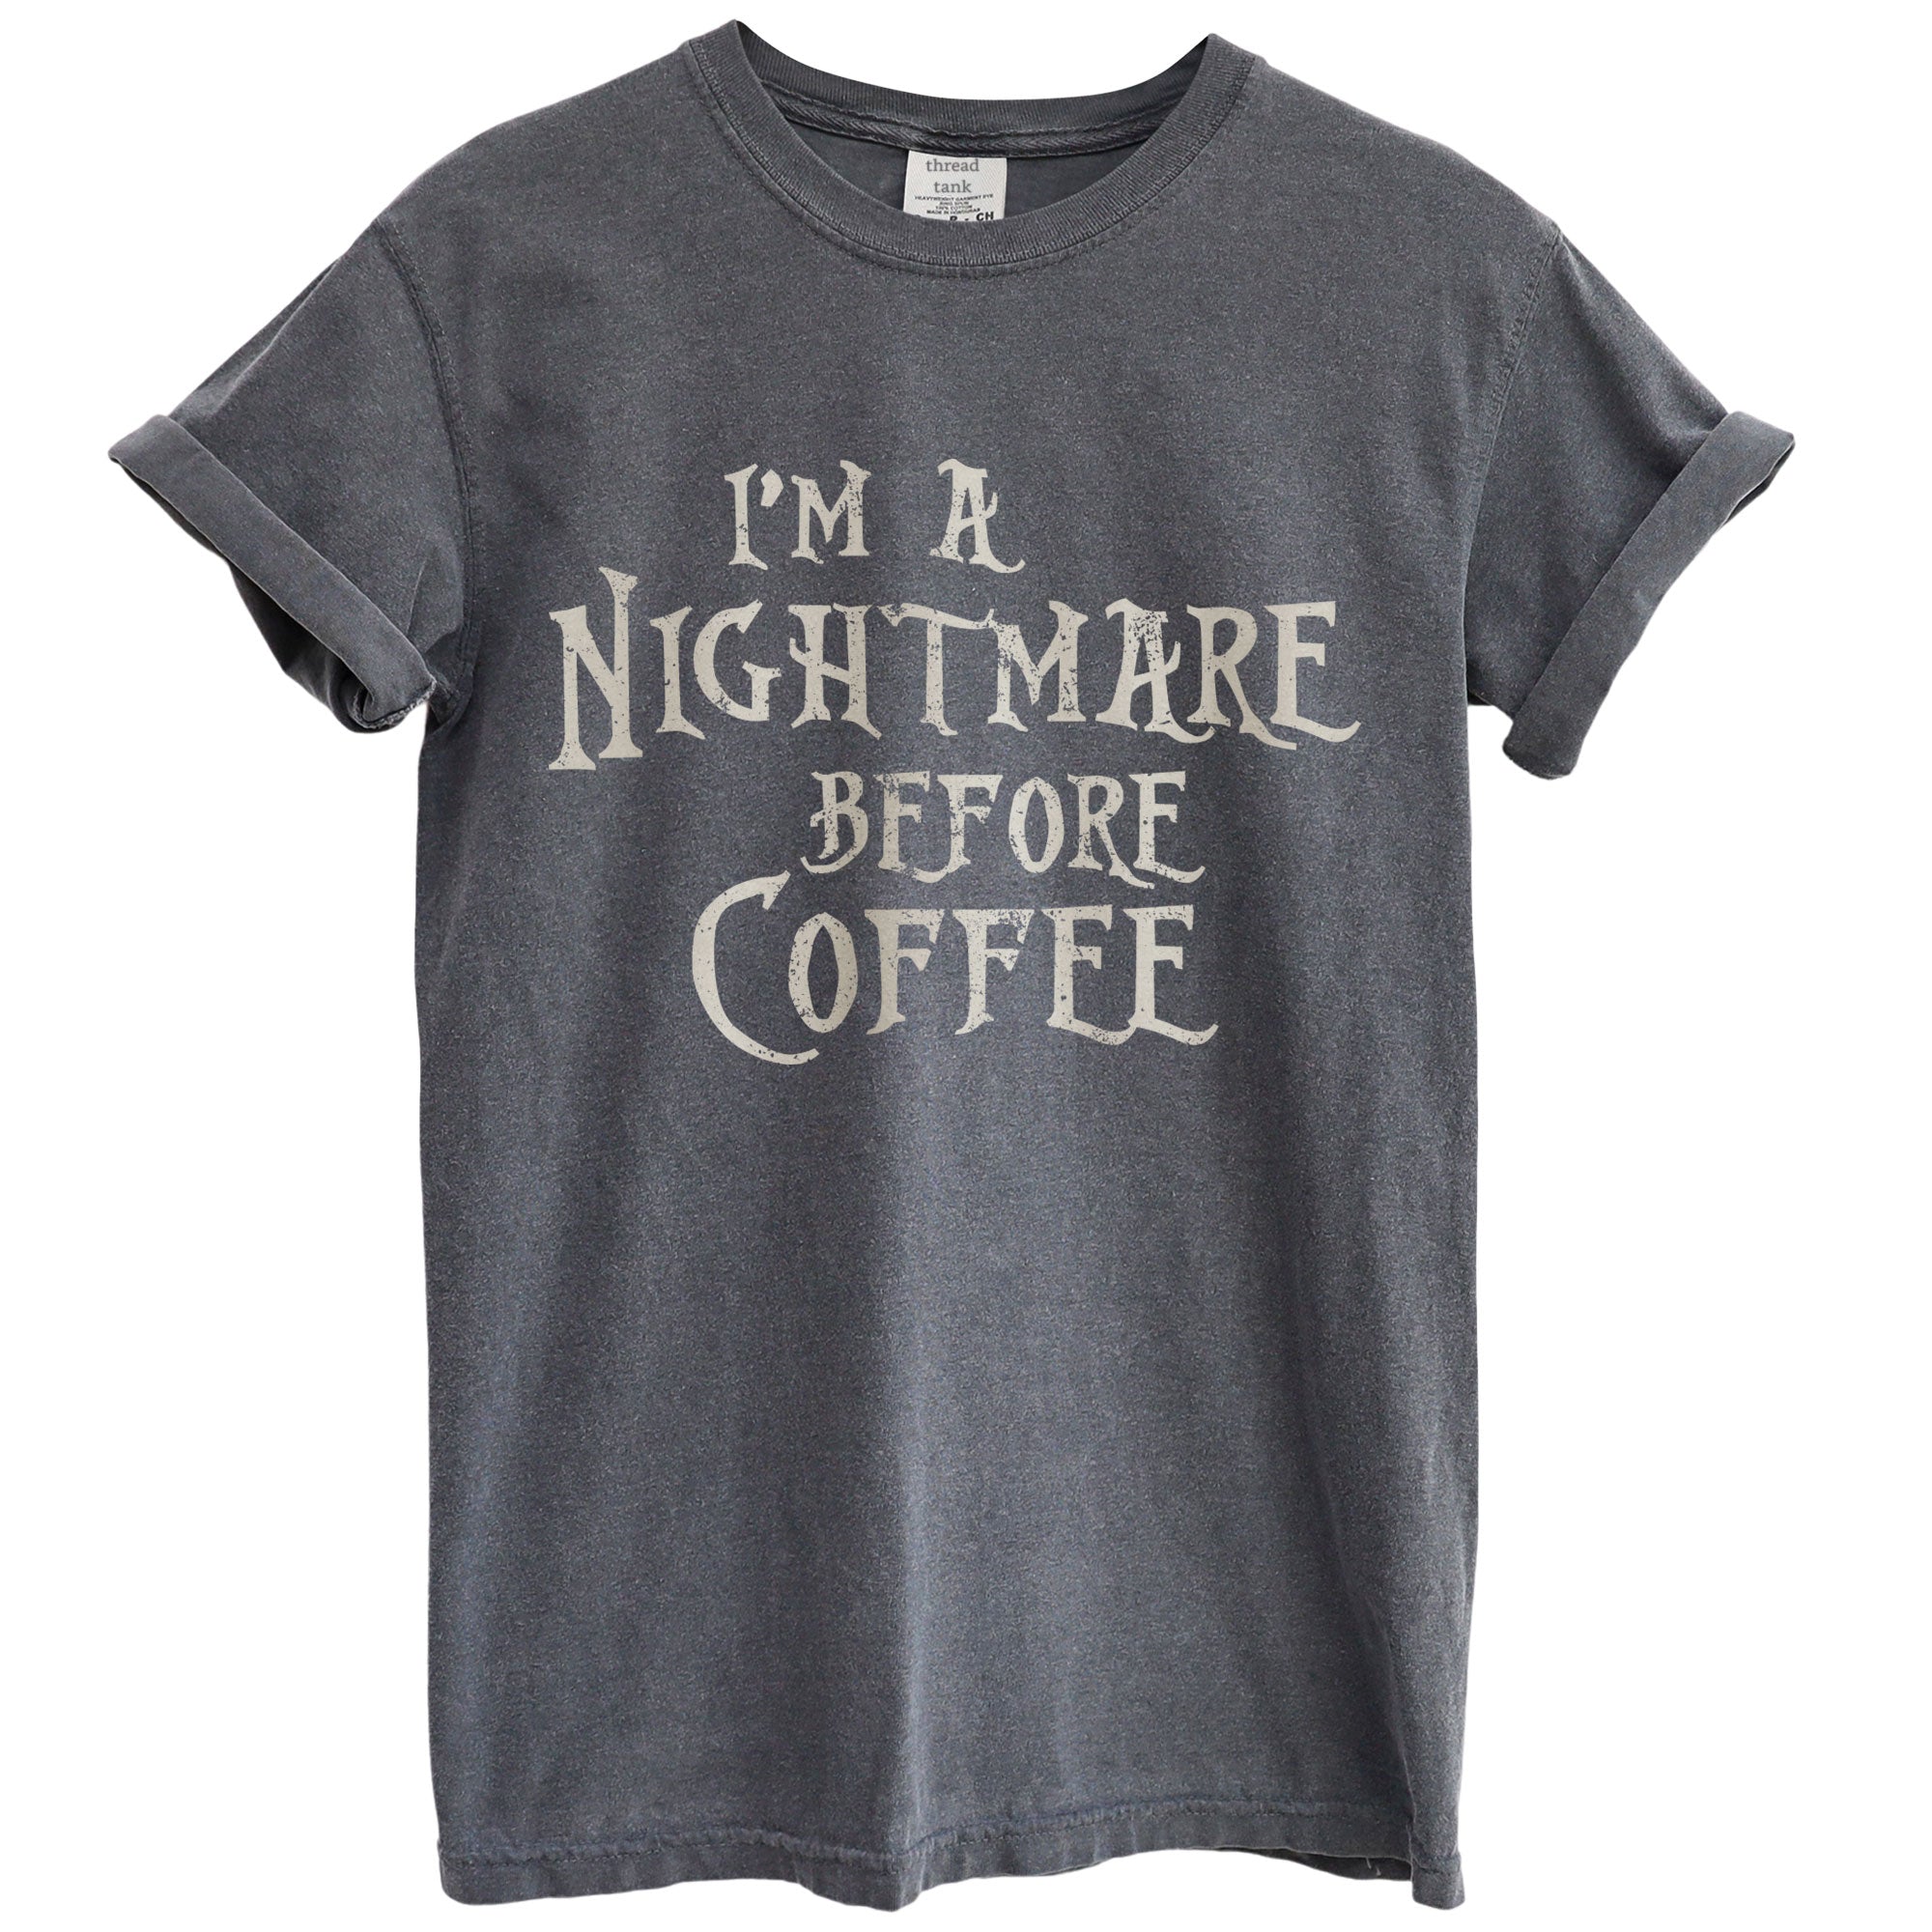 im a nightmare before coffee oversized garment dyed shirt